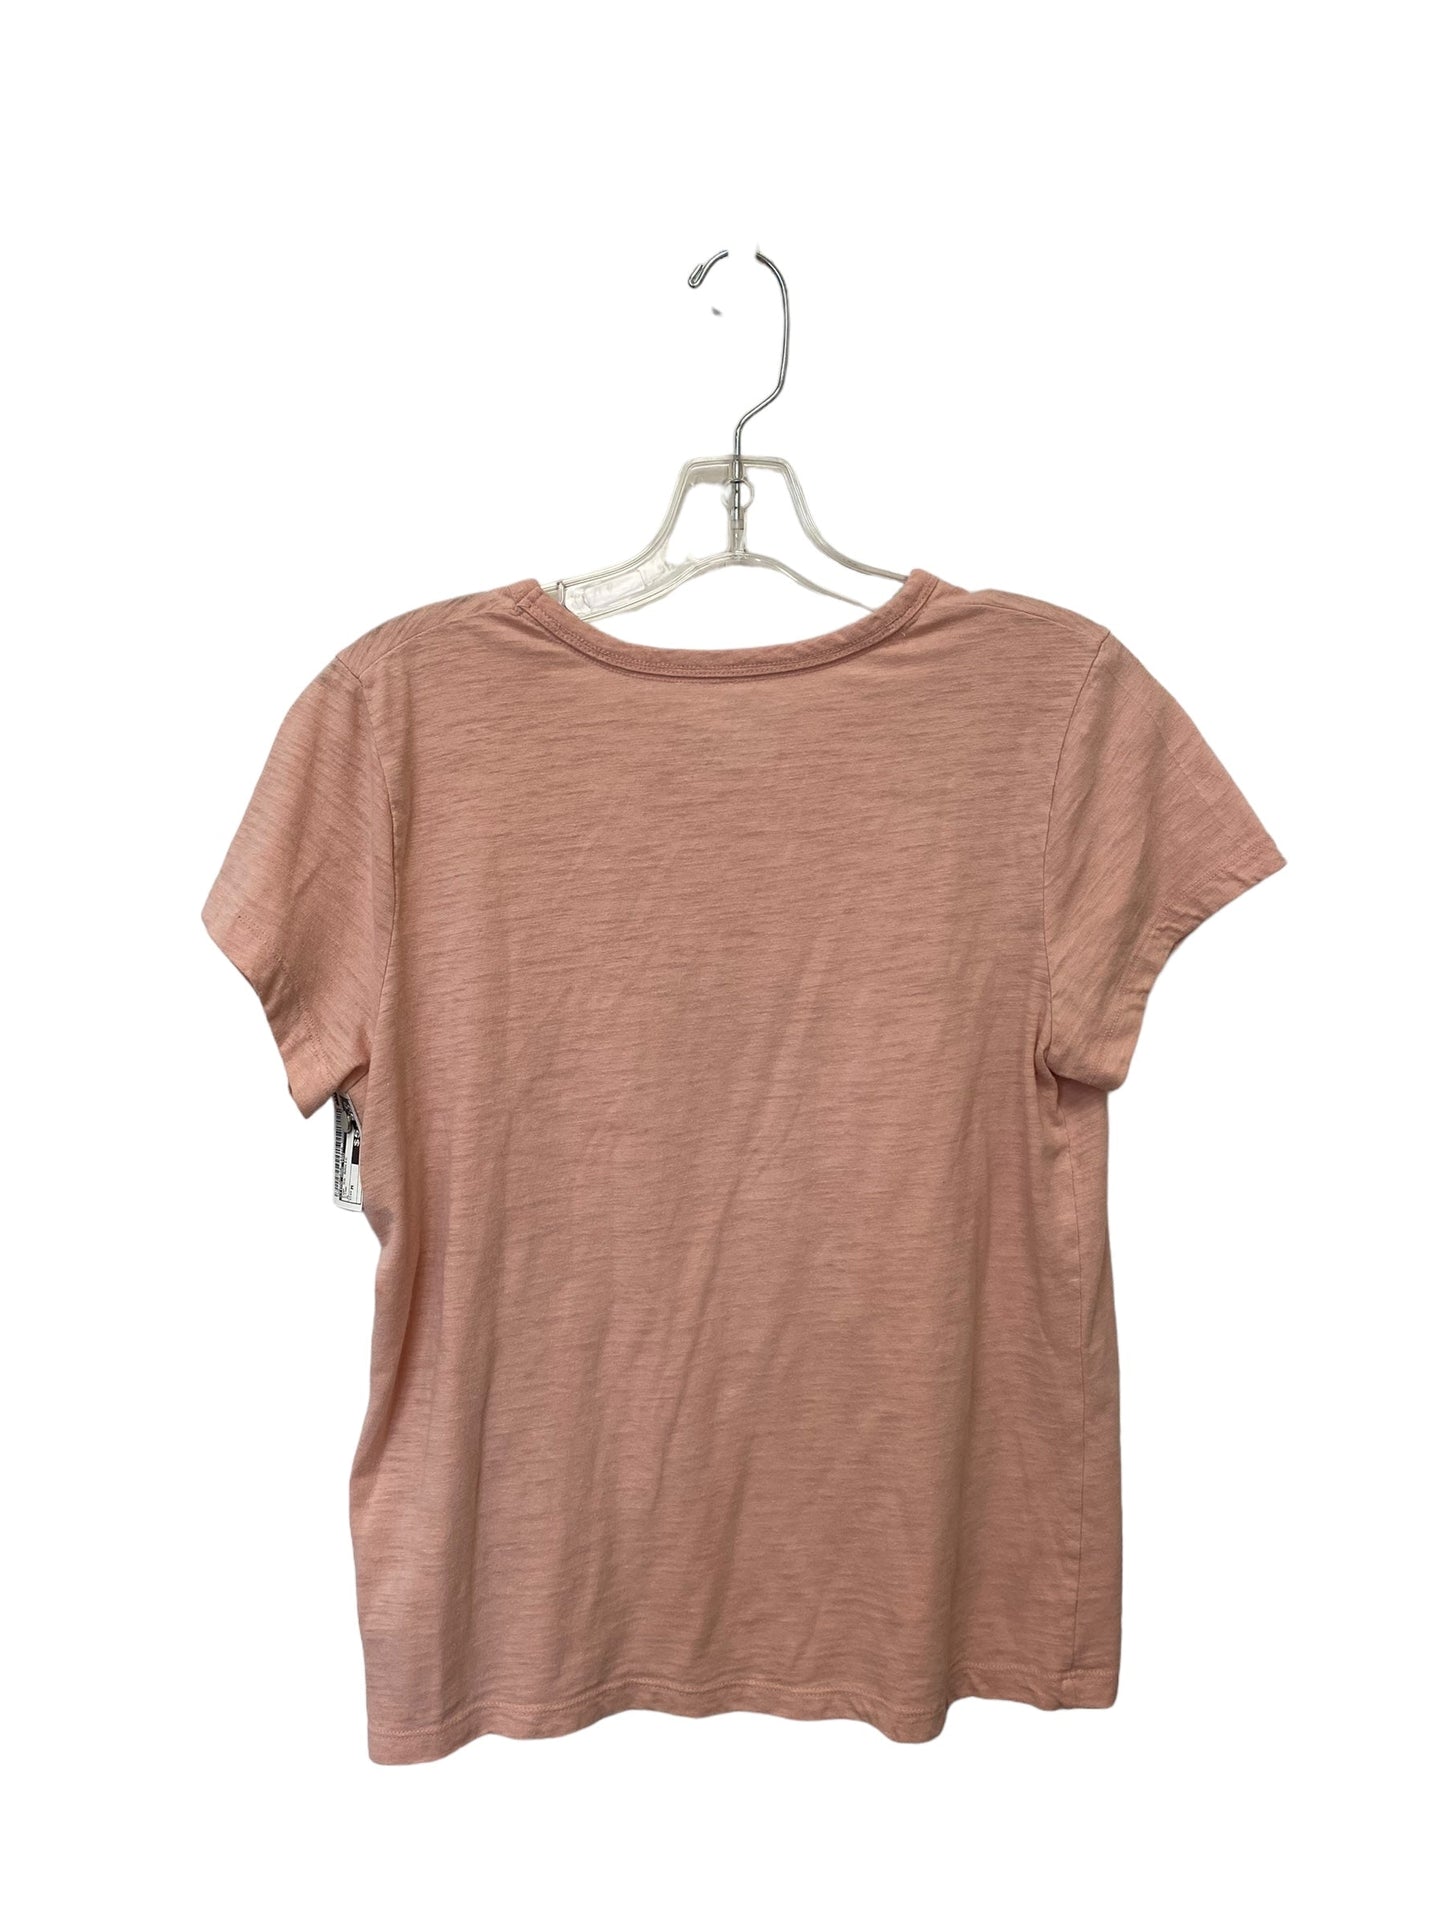 Pink Top Short Sleeve Basic Time And Tru, Size M